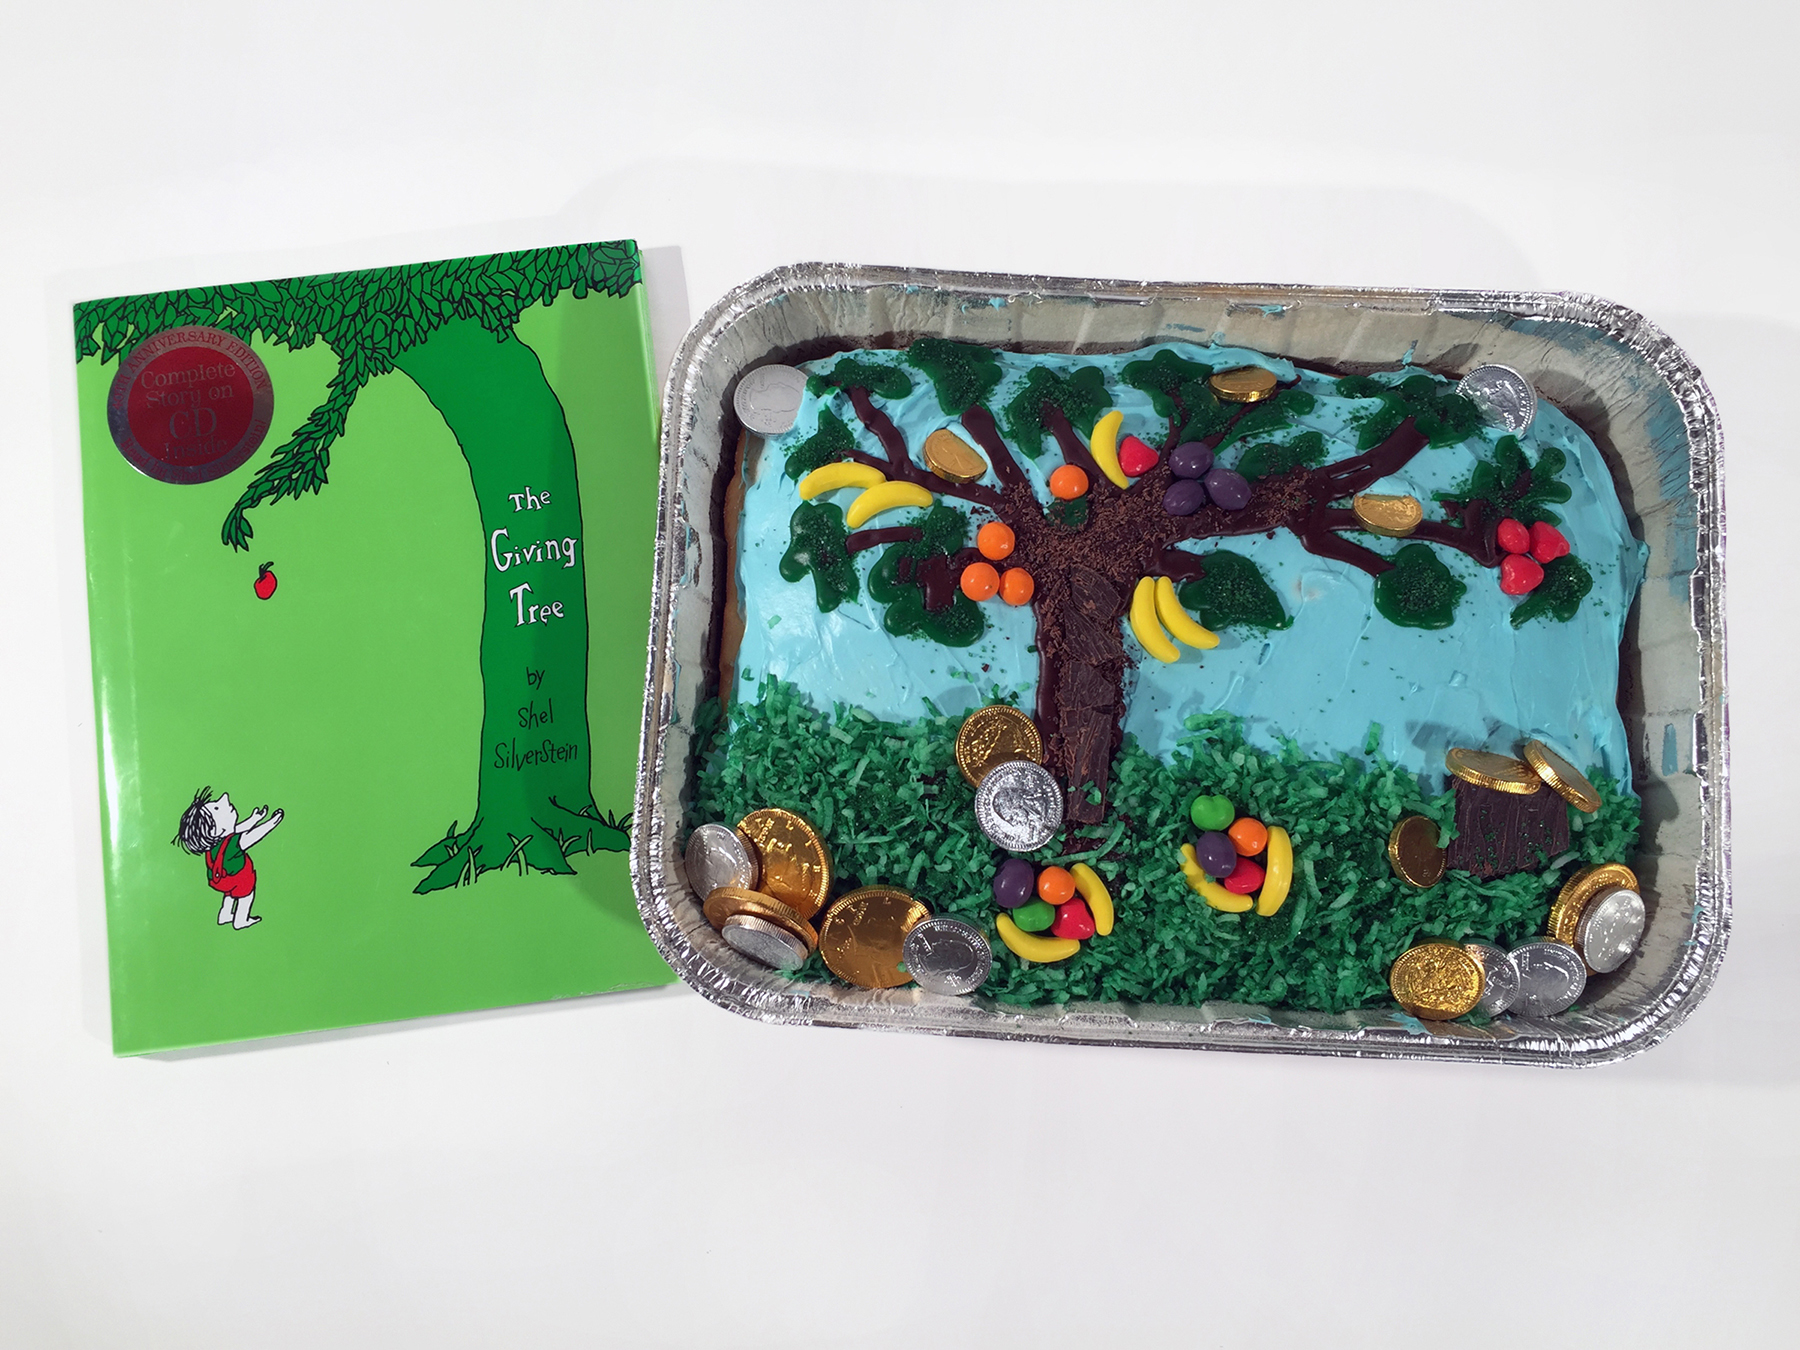 A cake from the Edible Book Festival hosted by the University Library celebrates The Giving Tree with a sheet pan cake decorated with candy fruit and money. Photo from the University of Illinois Library's website.